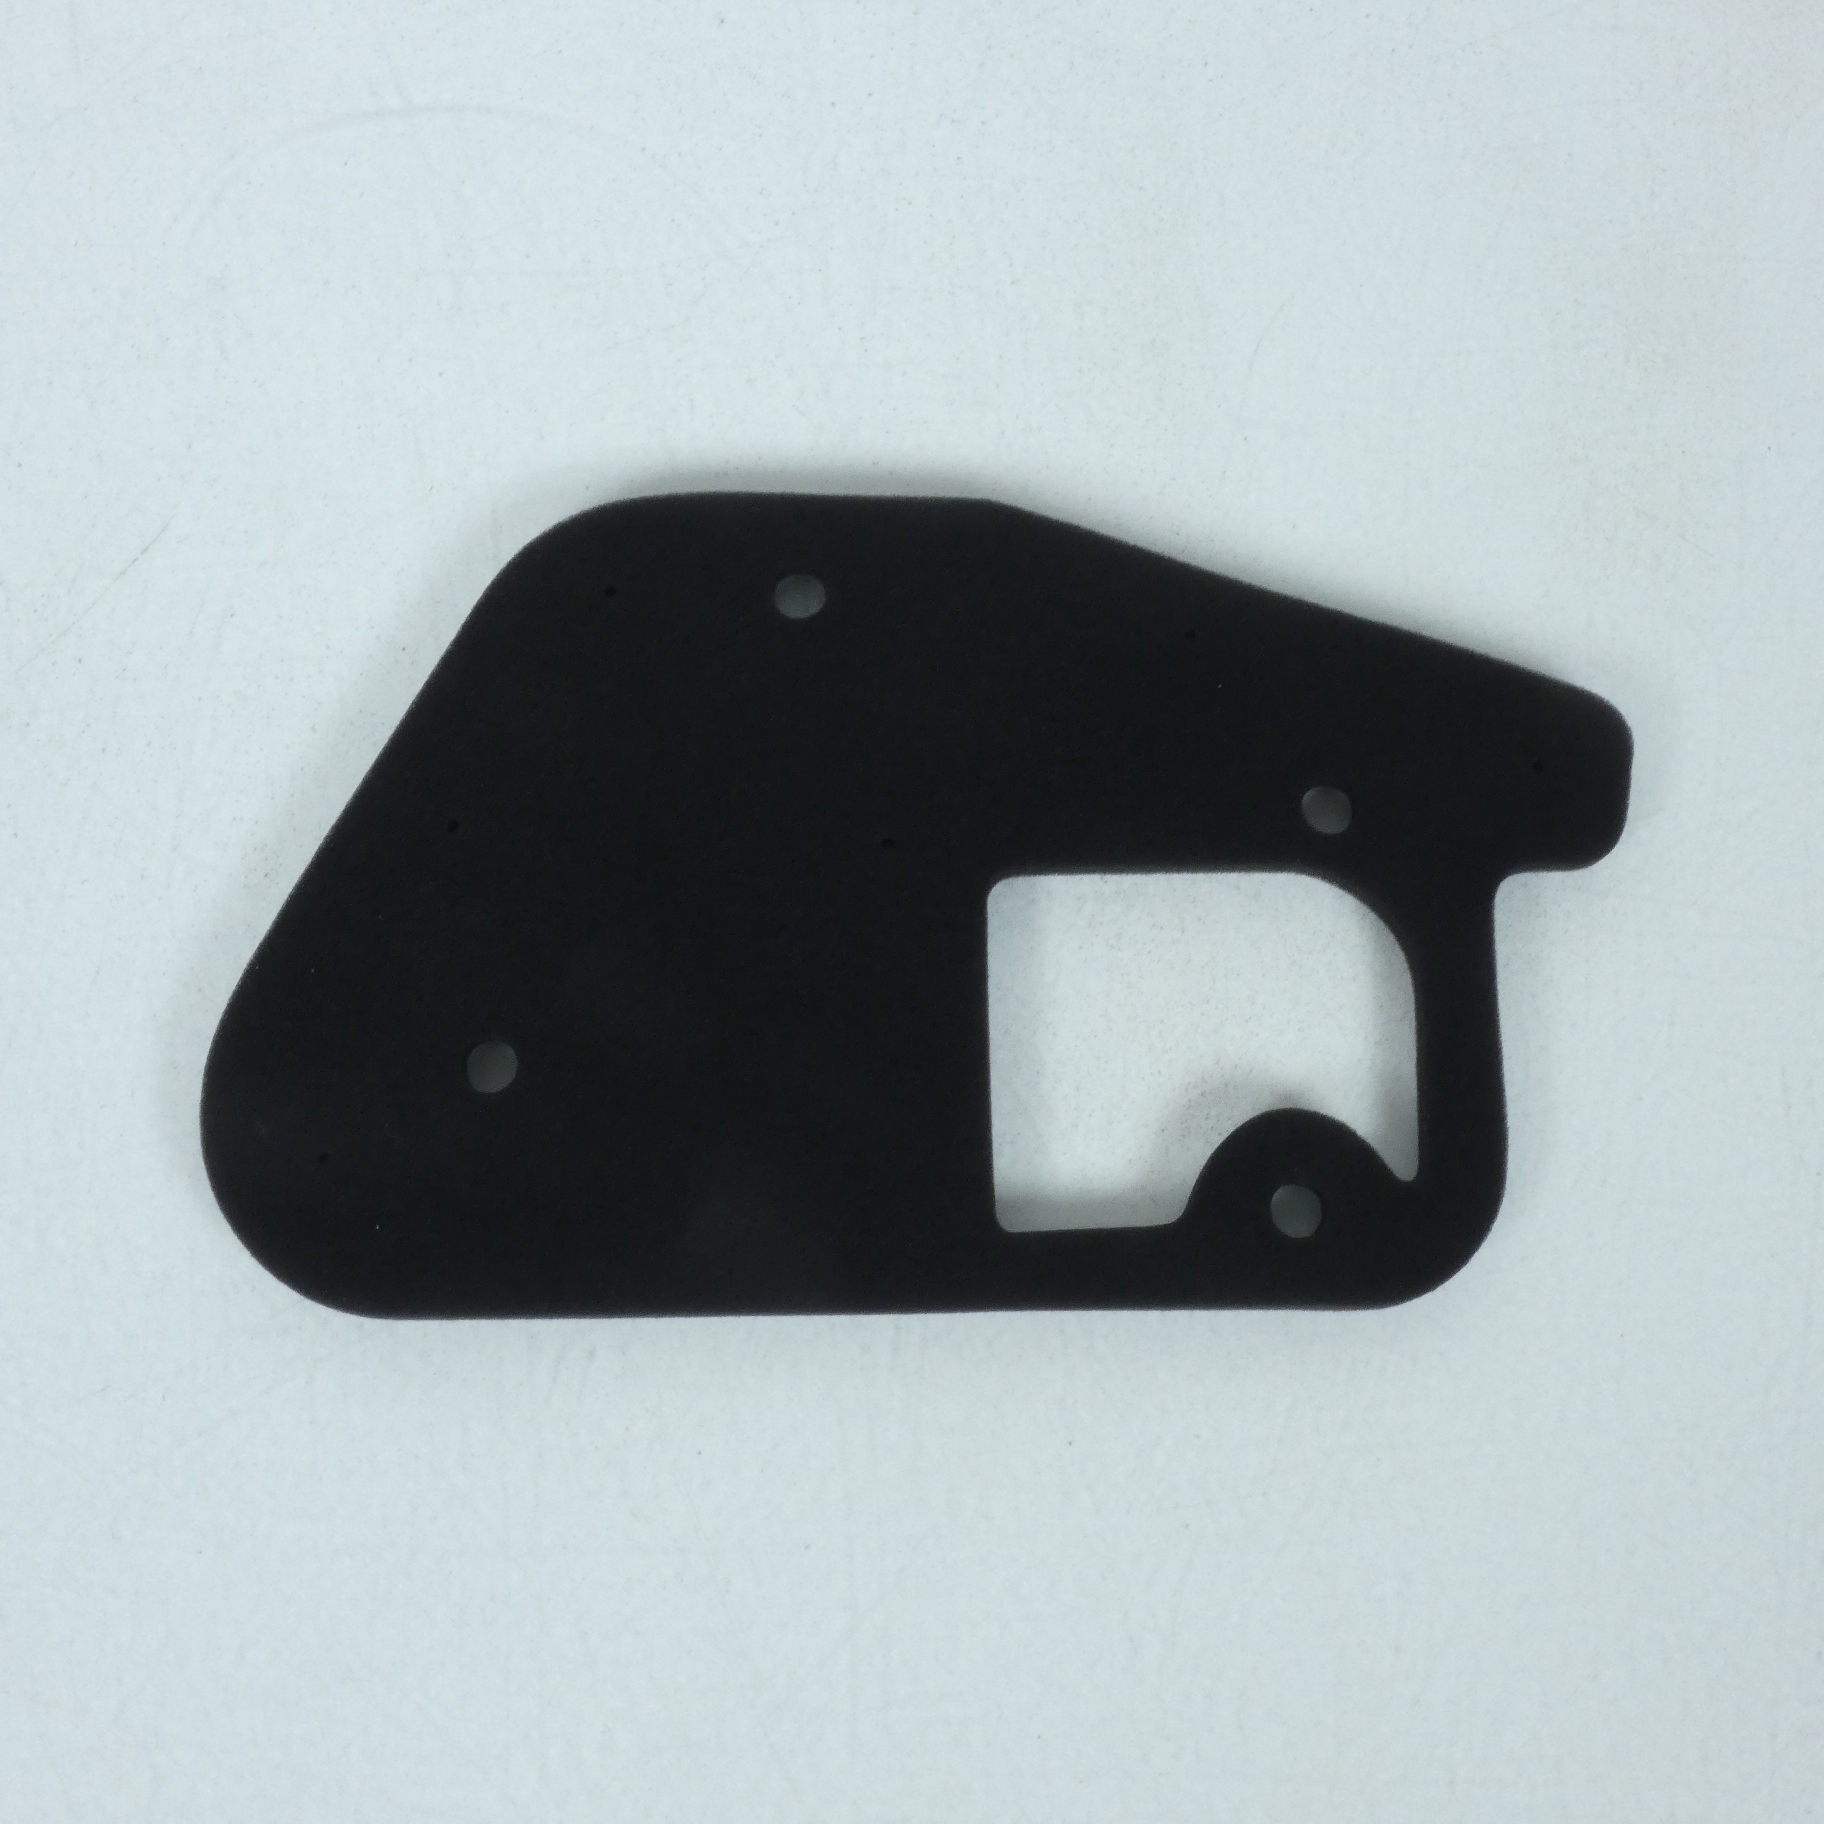 Filtre à air Sifam pour scooter Yamaha 50 Spy 1997-2011 Neuf